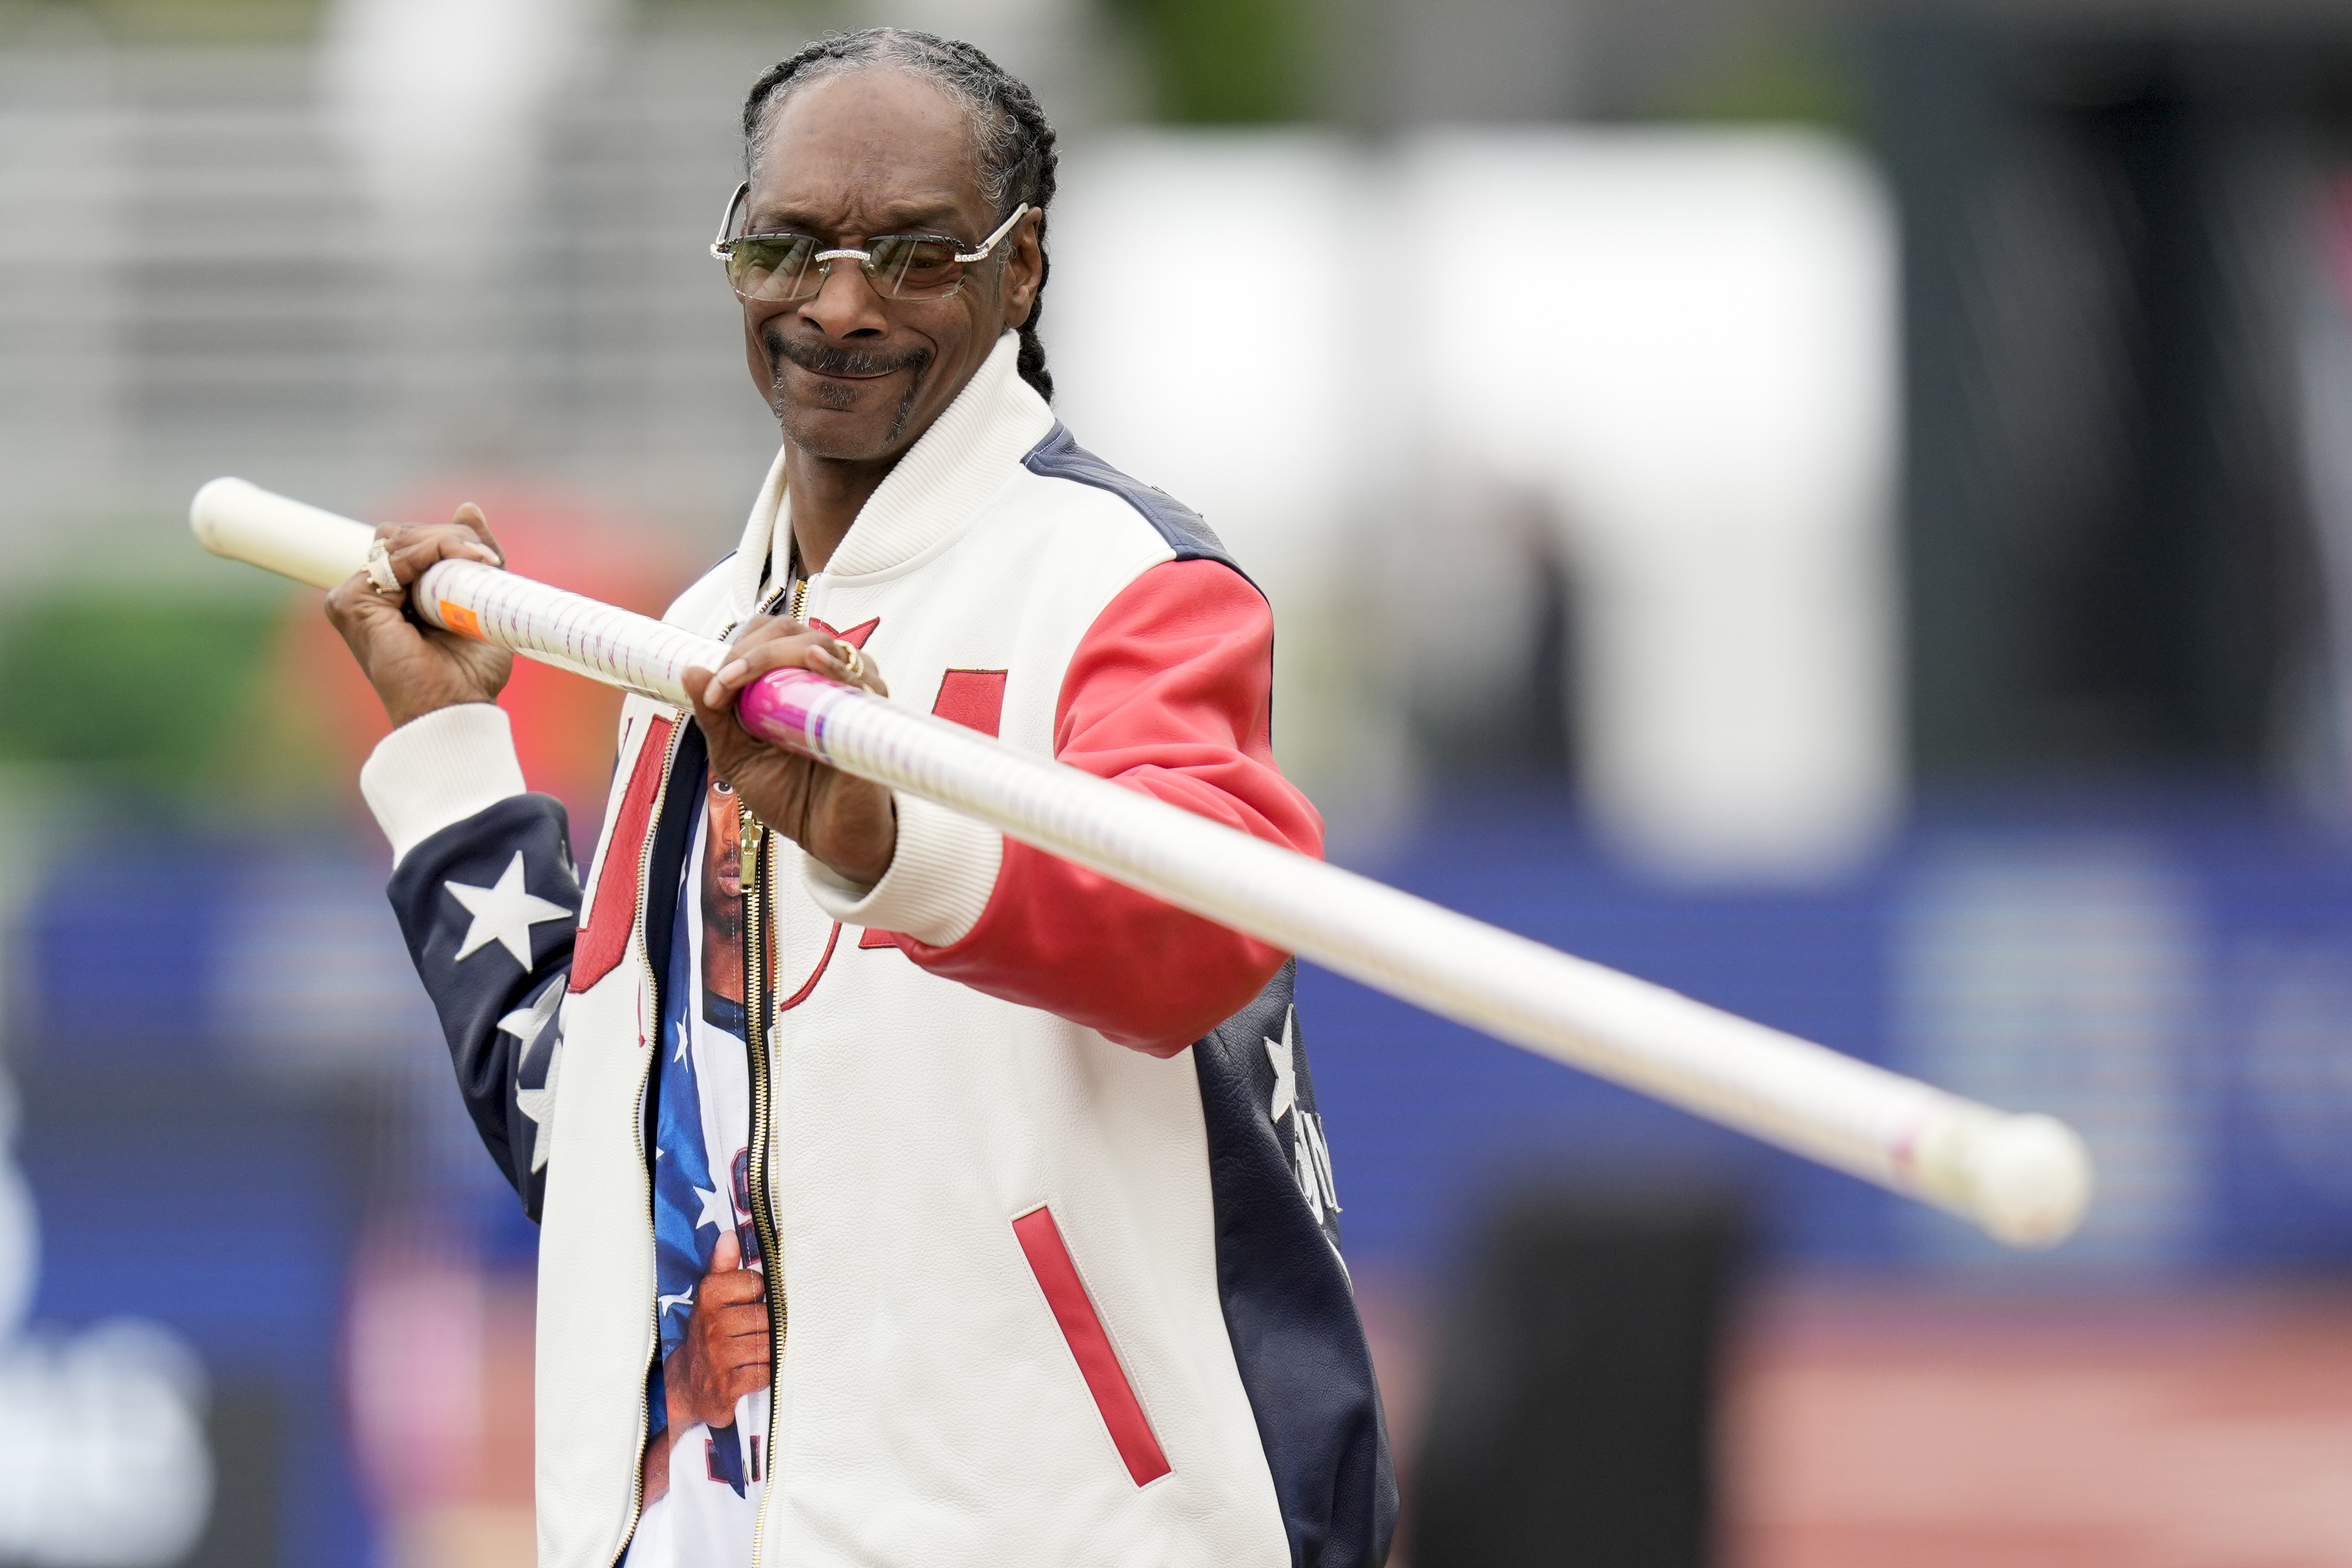 Play entertainer, Snoop Dogg gets a pole vault lesson during the U.S. Track and Field Olympic Team Trials Sunday, June 23, 2024, in Eugene, Ore. (AP Photo/Charlie Neibergall)